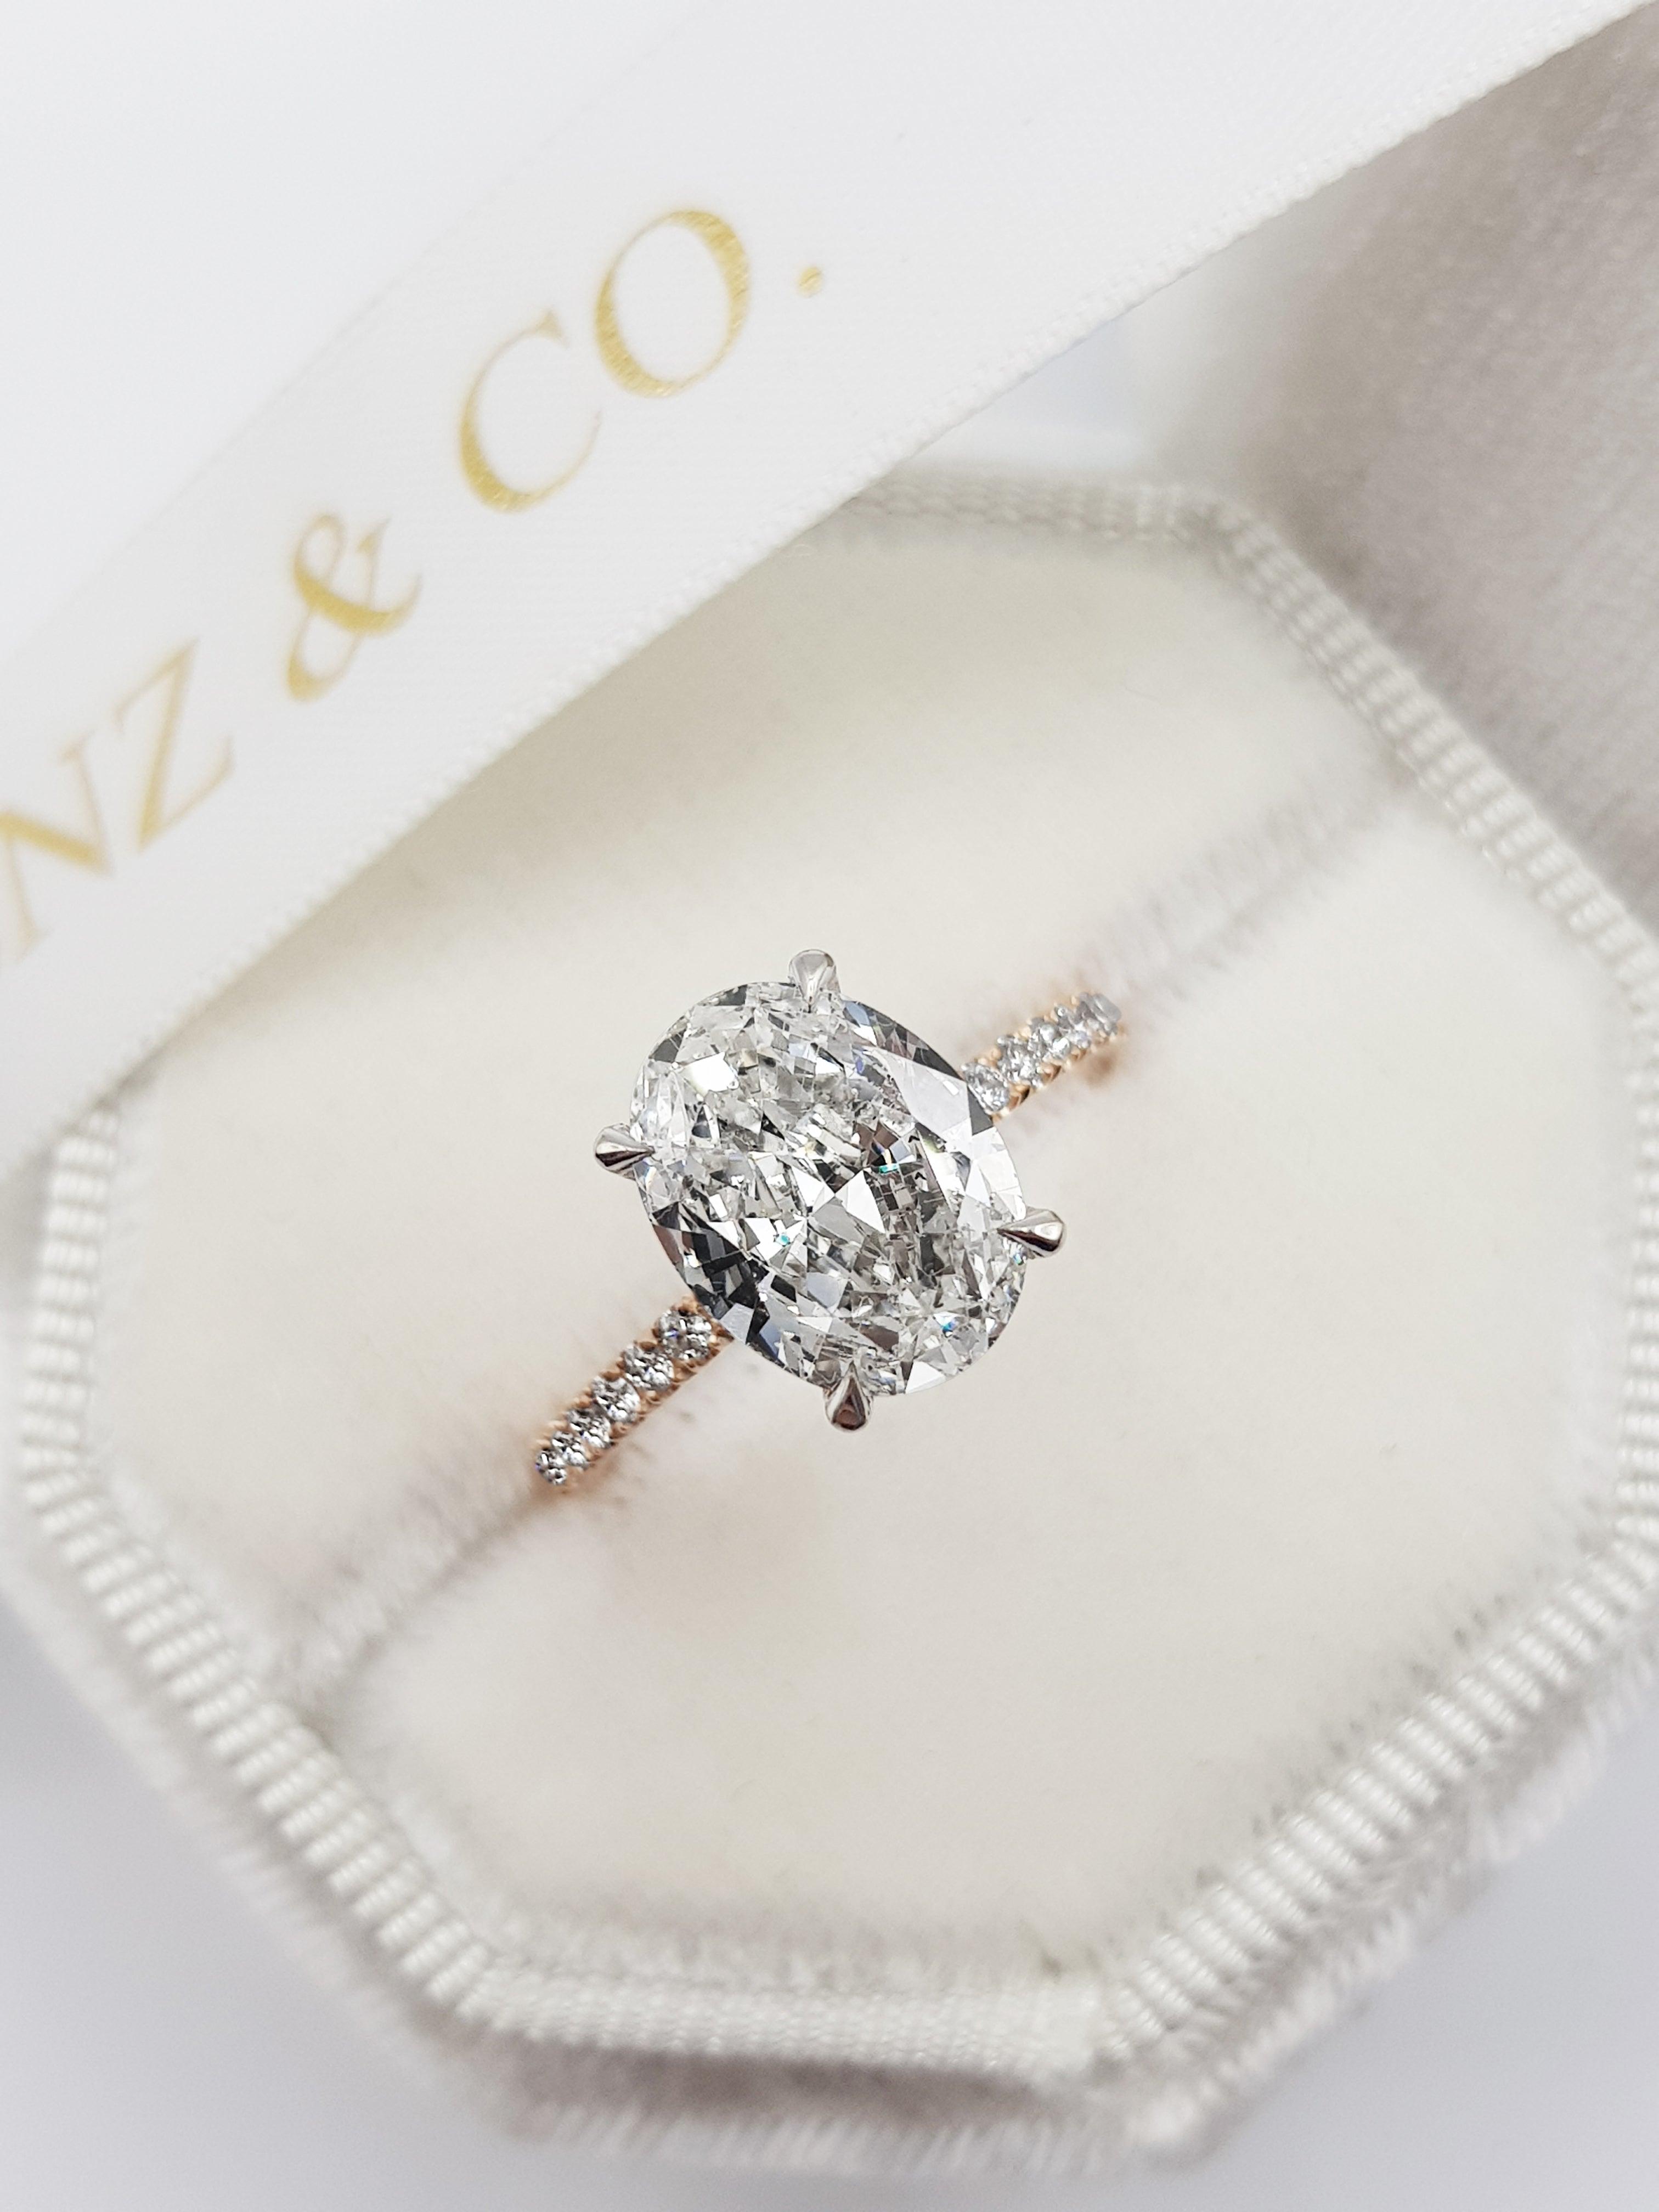 Engagement Rings | Rings | Jewelry